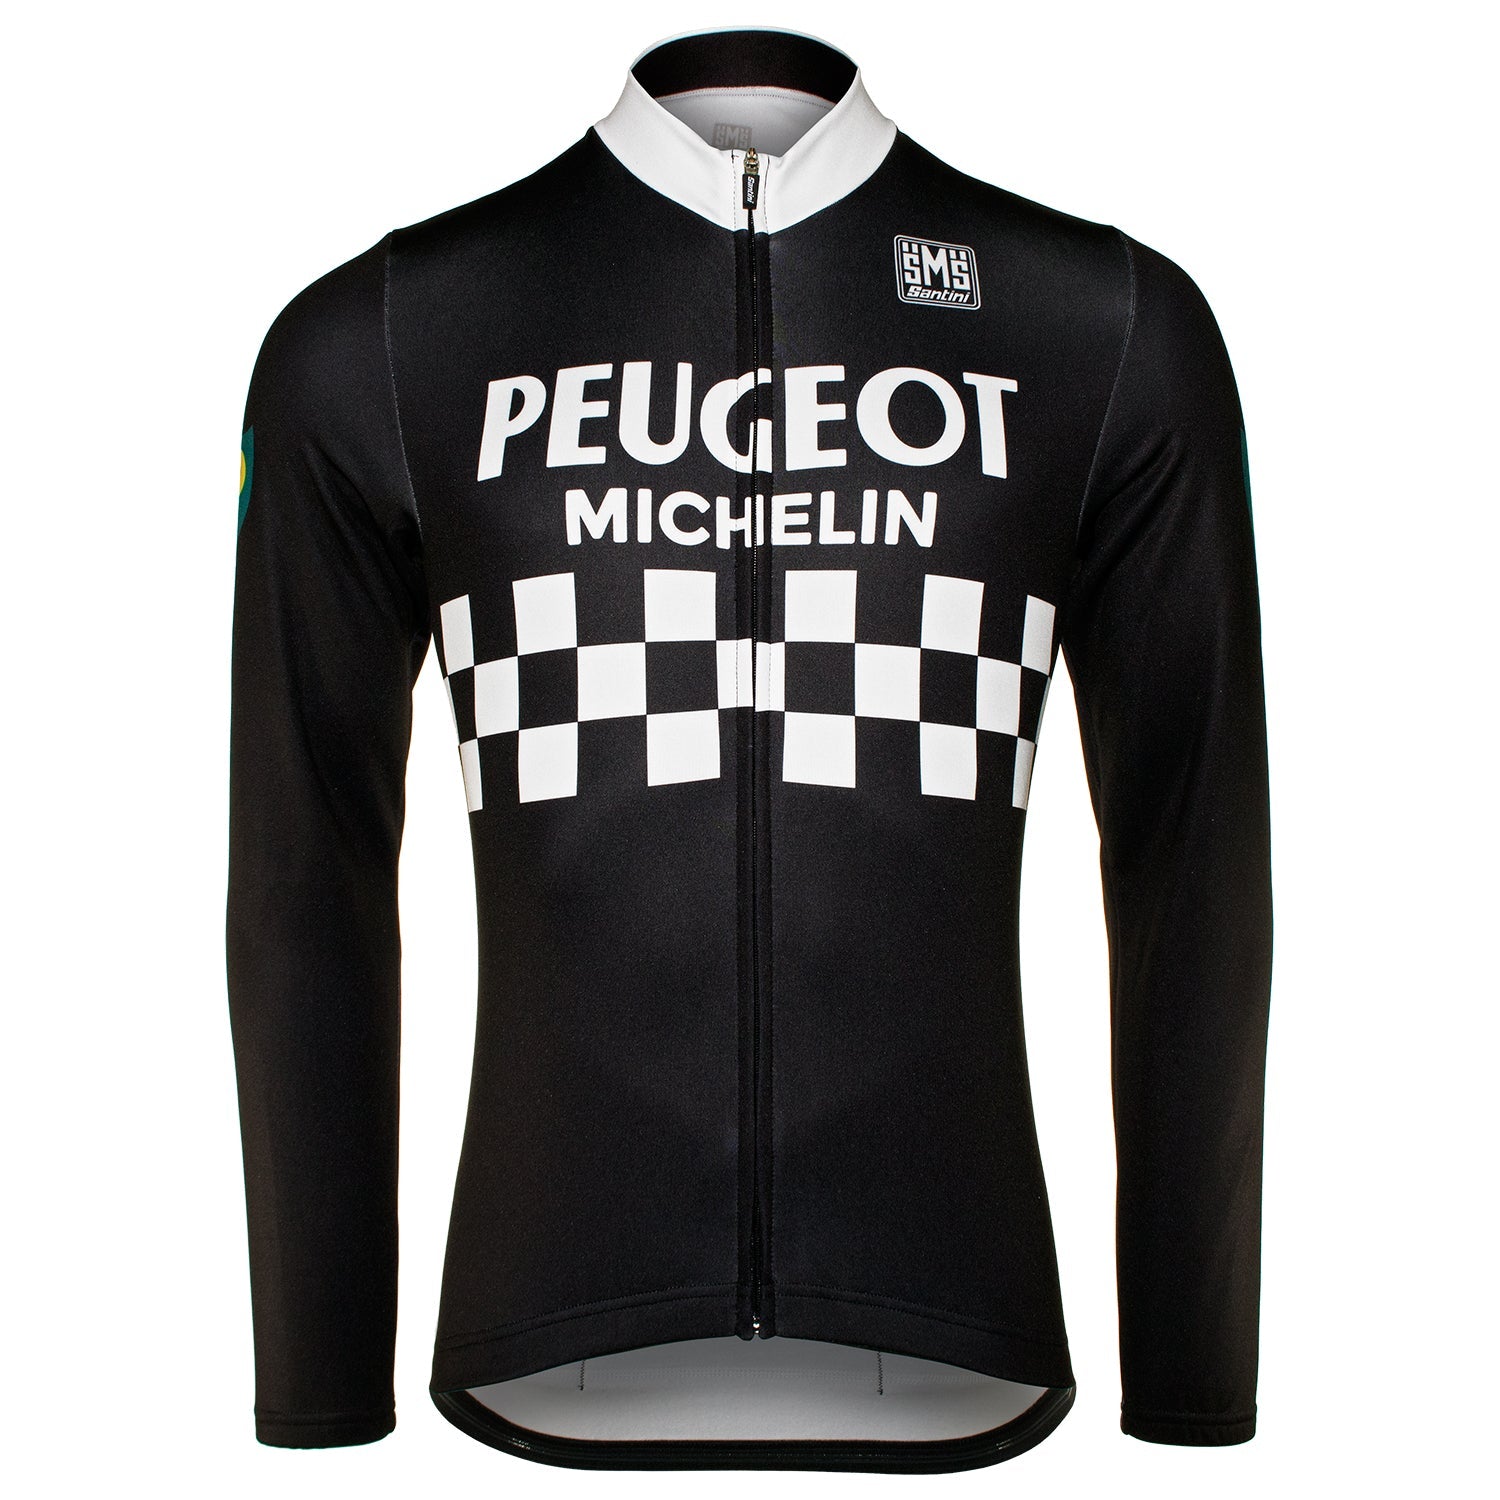 Peugeot | Vintage Cycling Jersey | 1980s | Cycles | Retro Cycle Jersey | Short Sleeves T-Shirt | Made in France | Size S/M